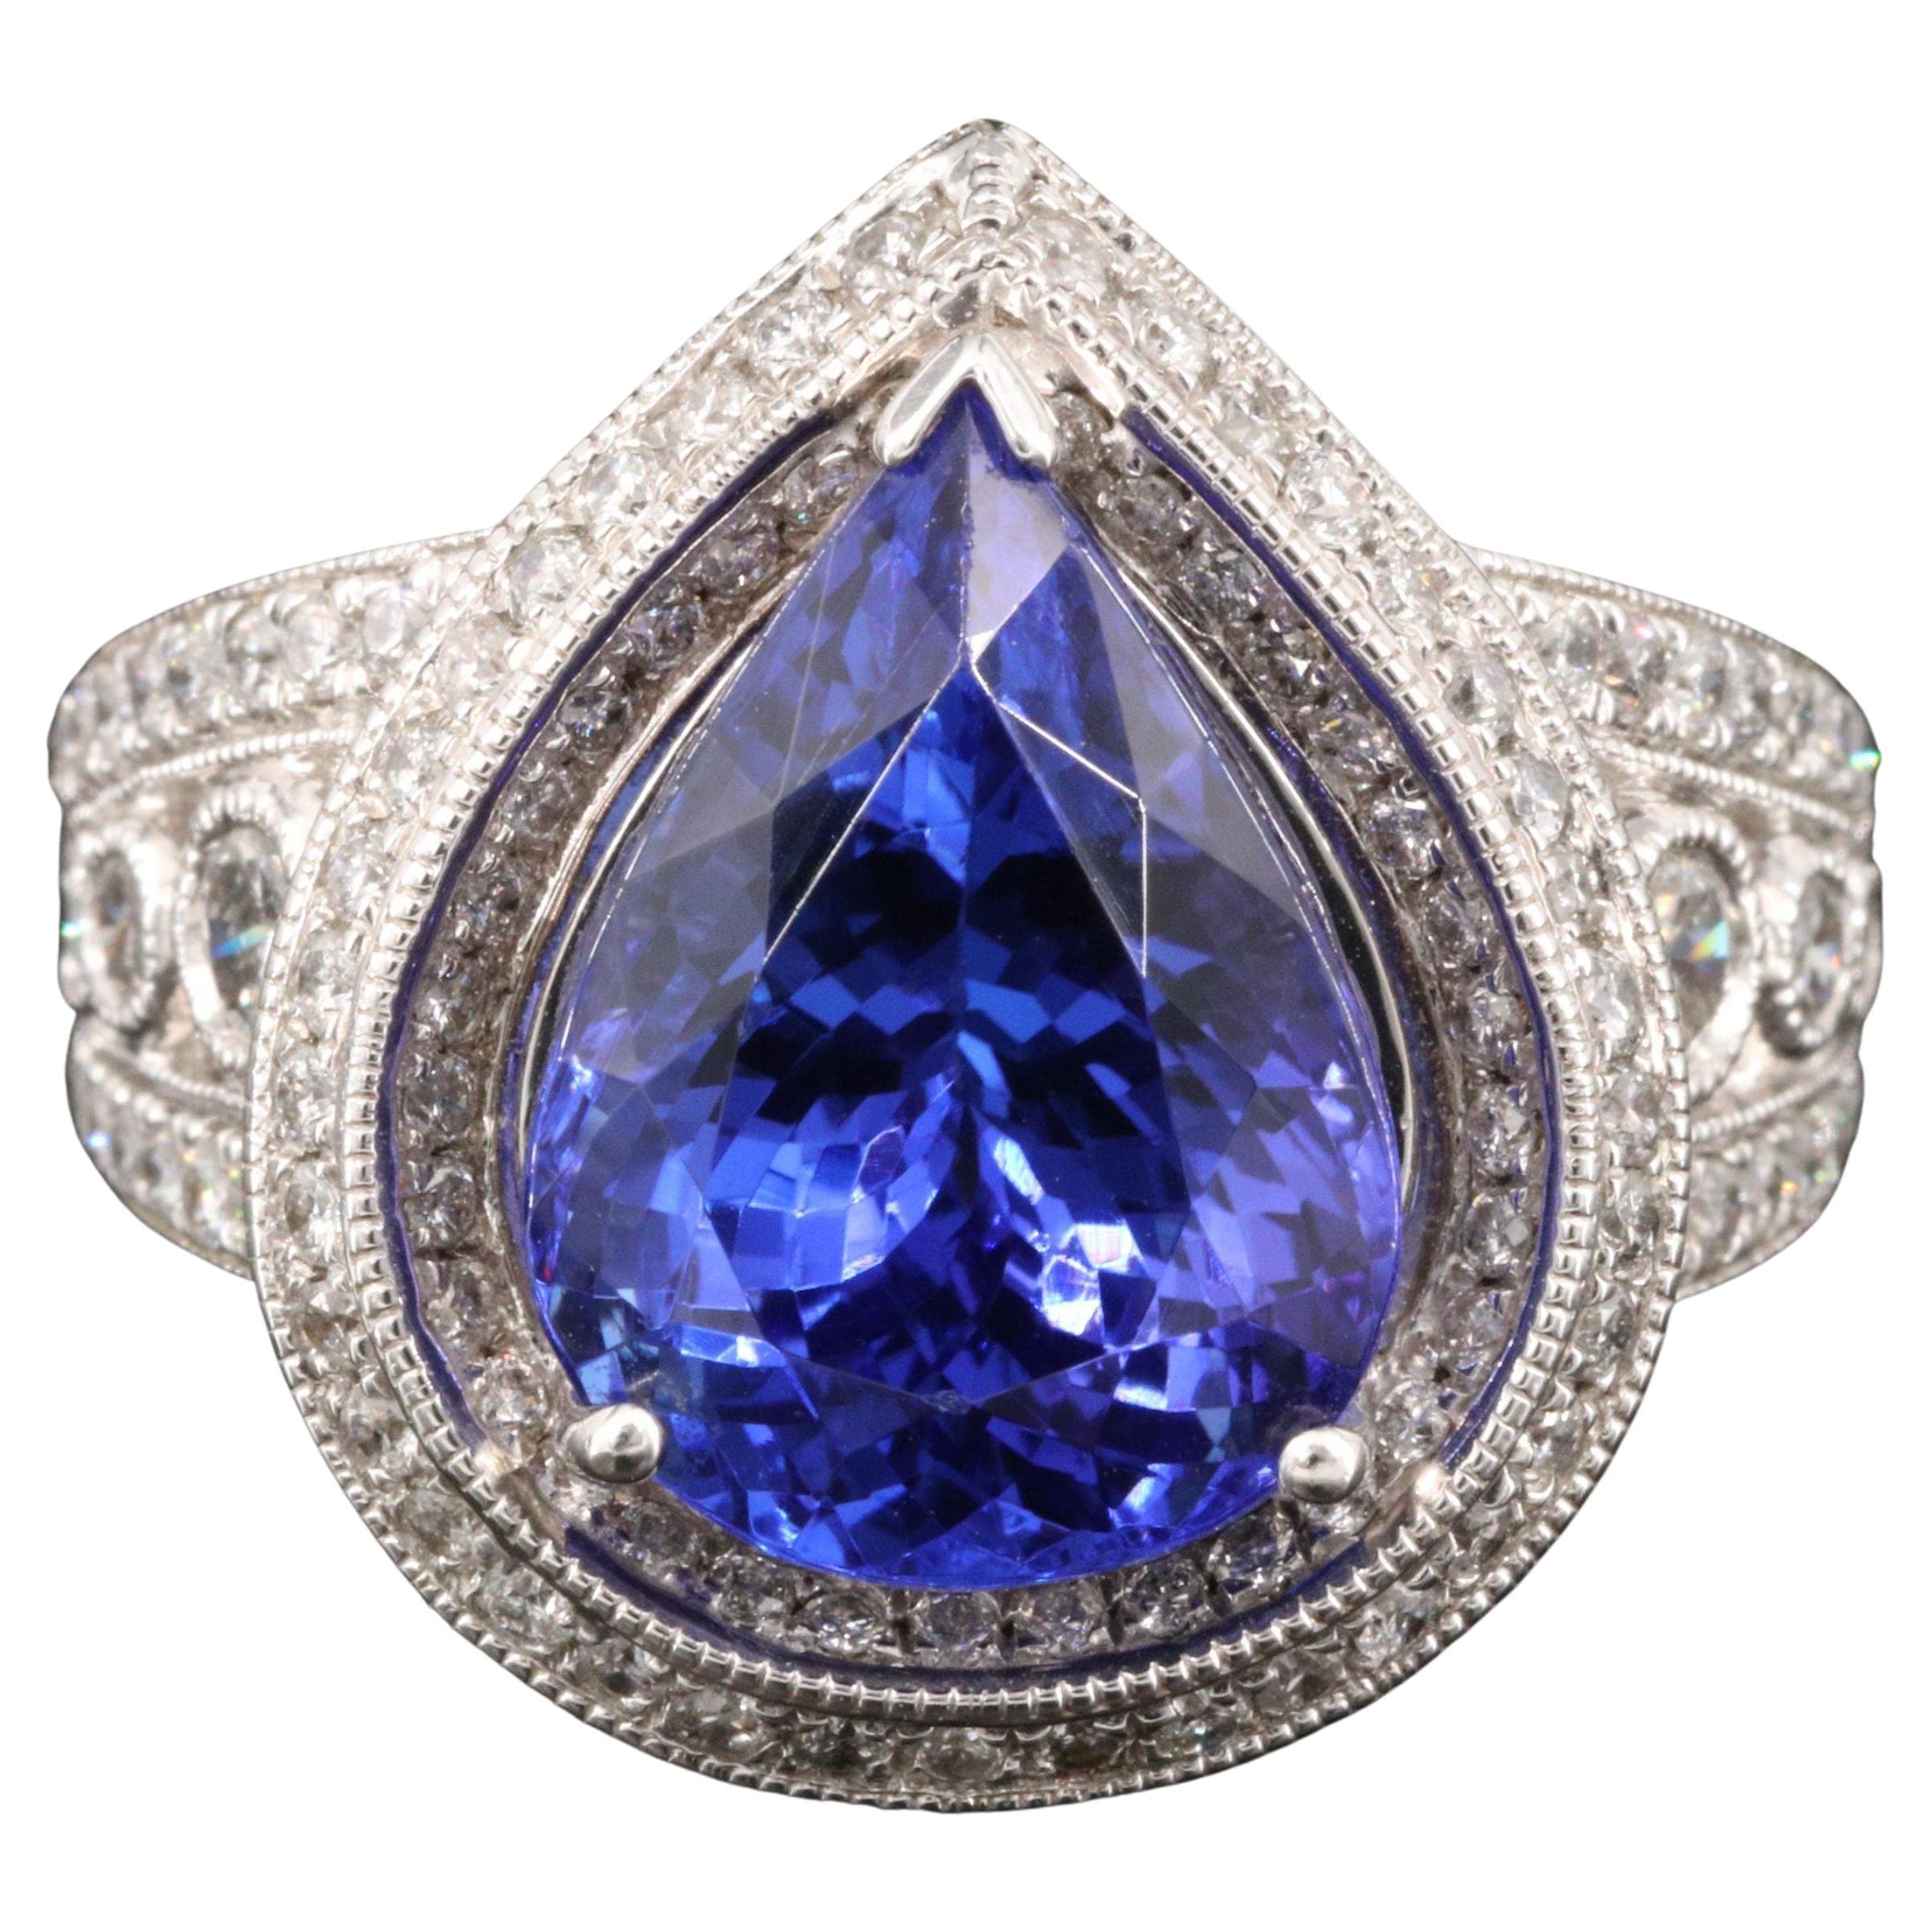 For Sale:  6.7 Carat Art Deco Pear Cut Tanzanite Engagement Ring White Gold Wedding Ring